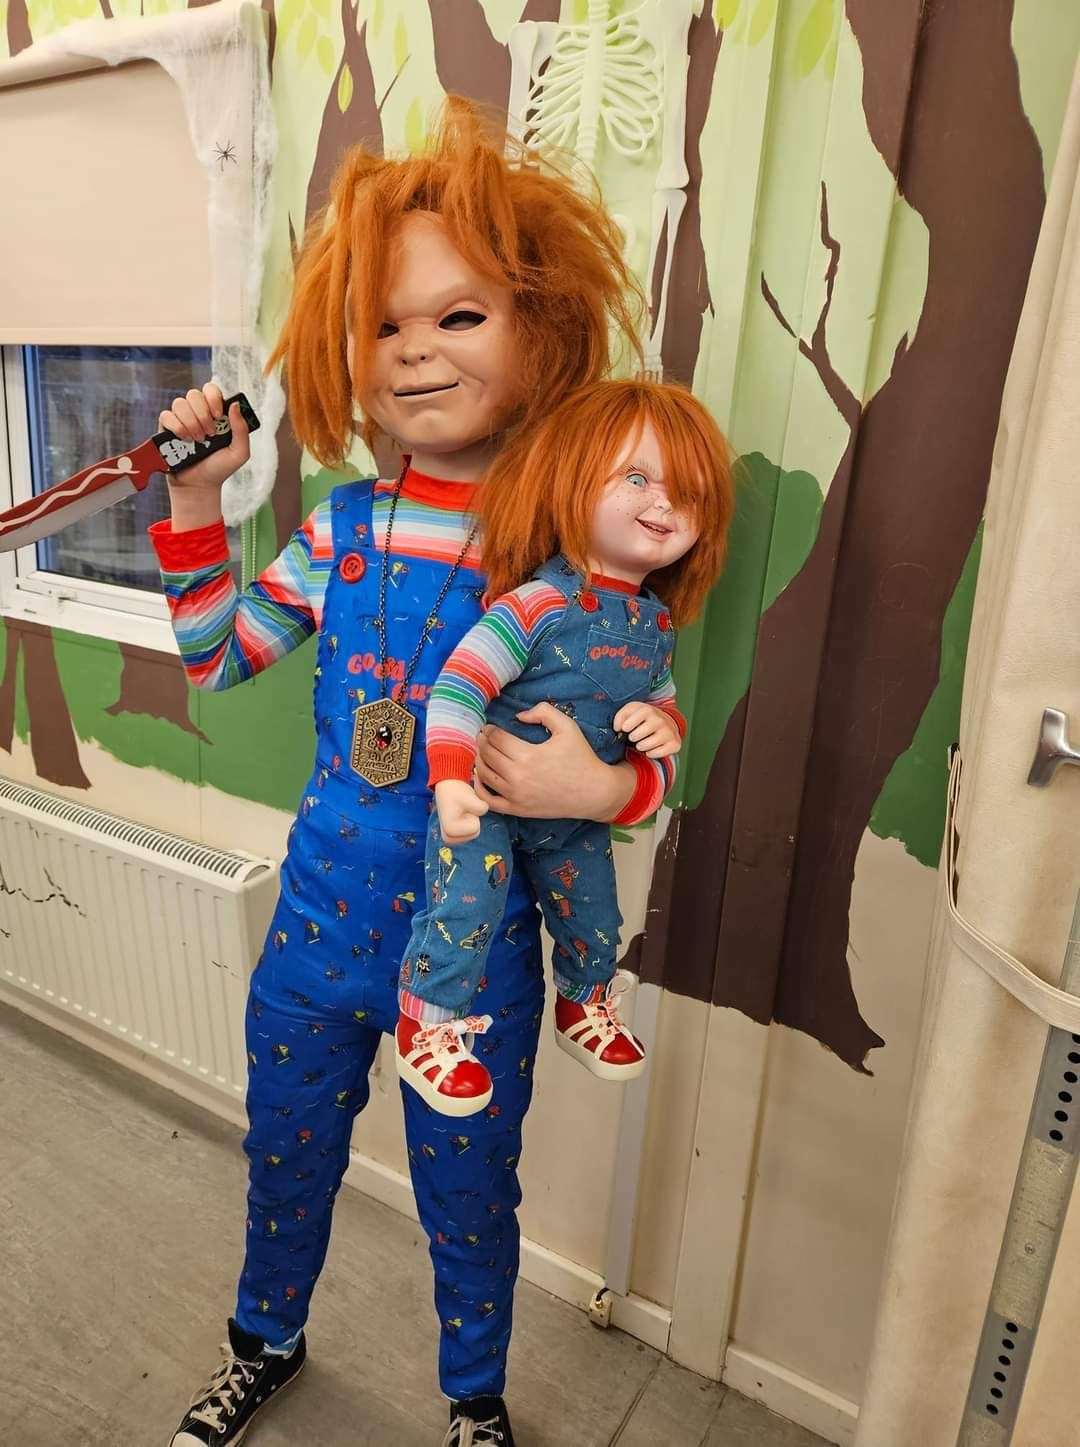 Shelly Louise shared her little one dressed as Chucky